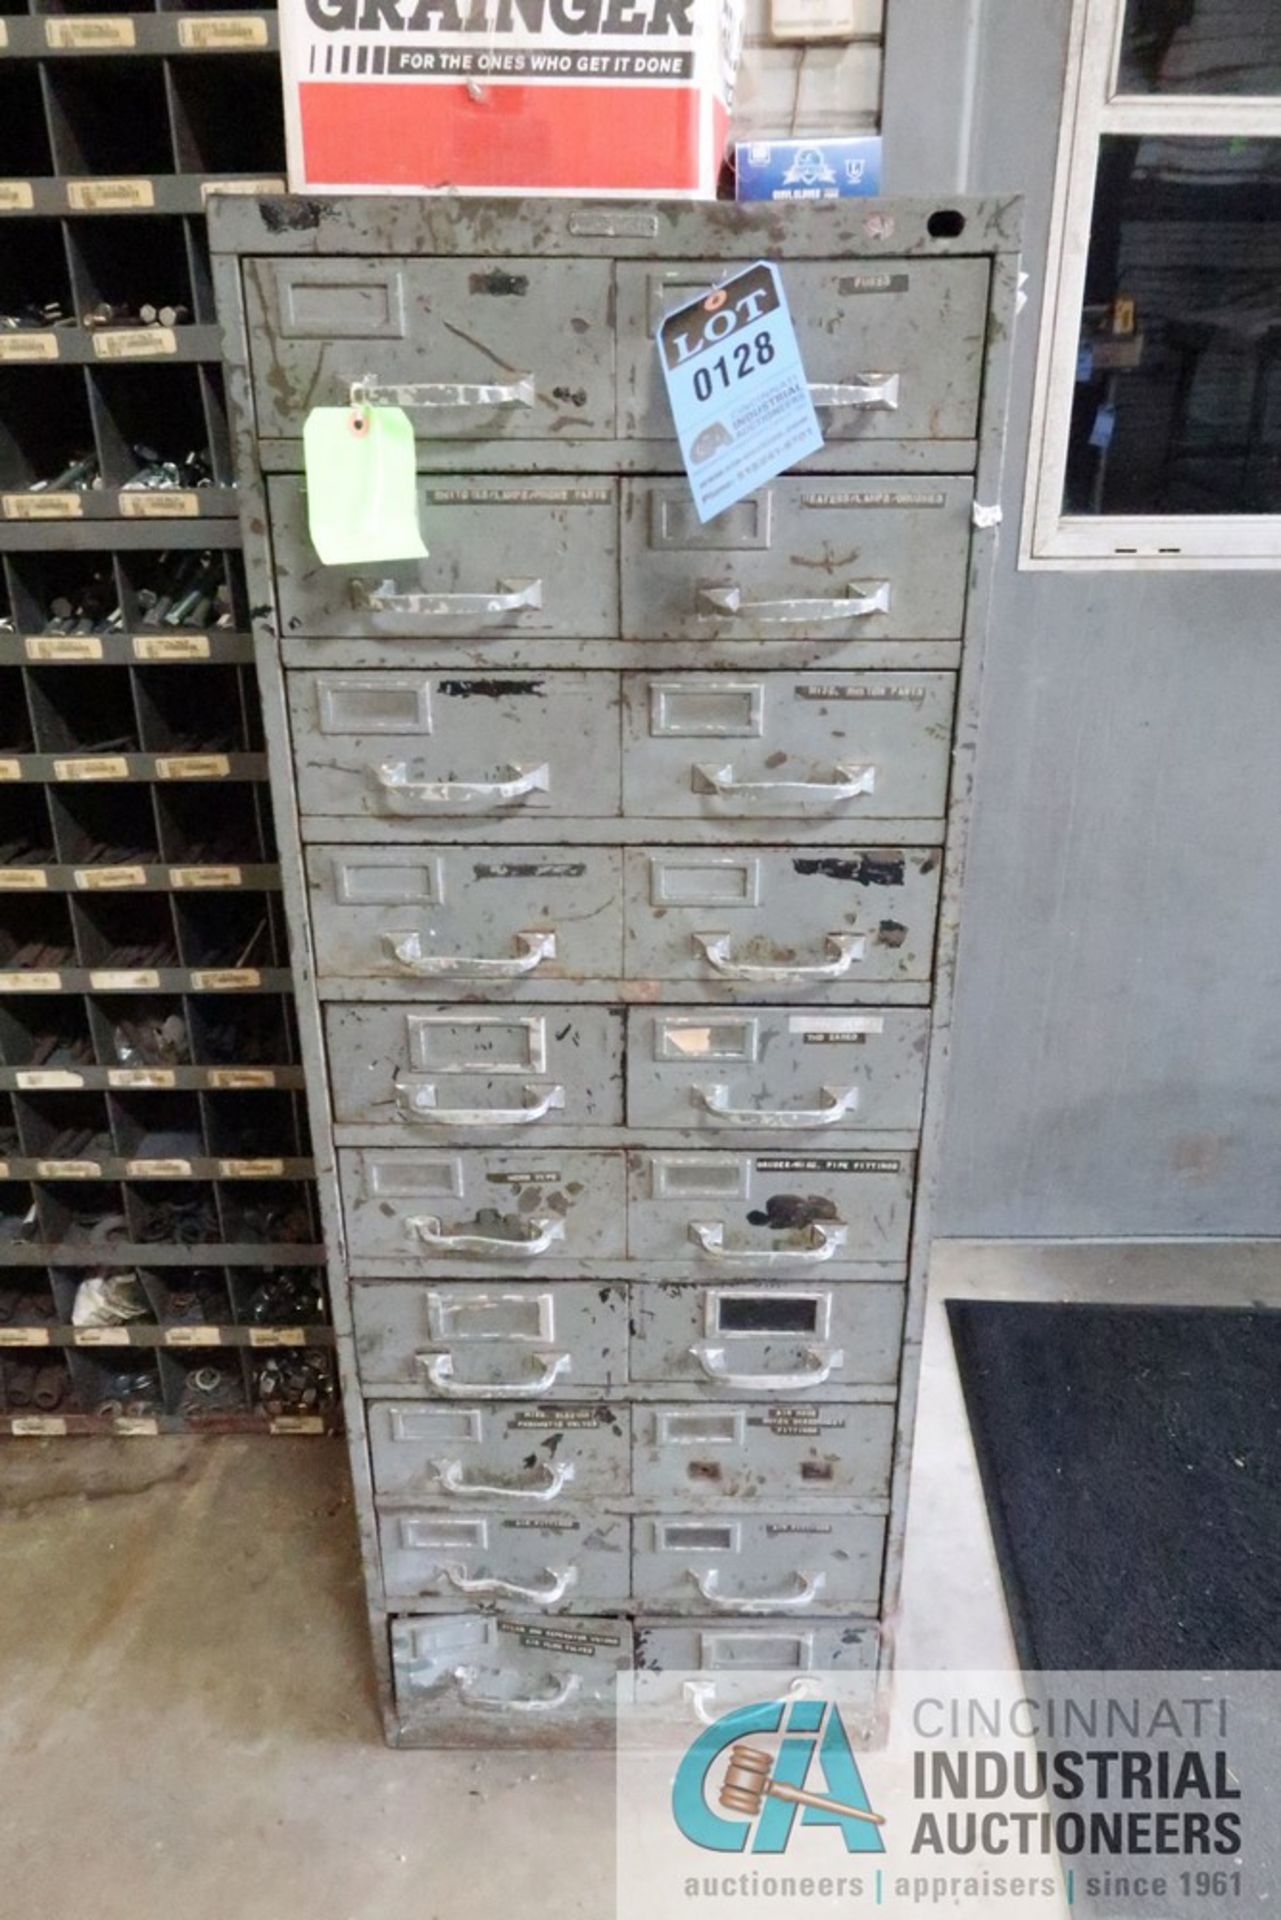 (LOT) MISCELLANEOUS ELECTRICAL, PNEUMATIC, AND MACHINE COMPONENTS WITH CABINETS